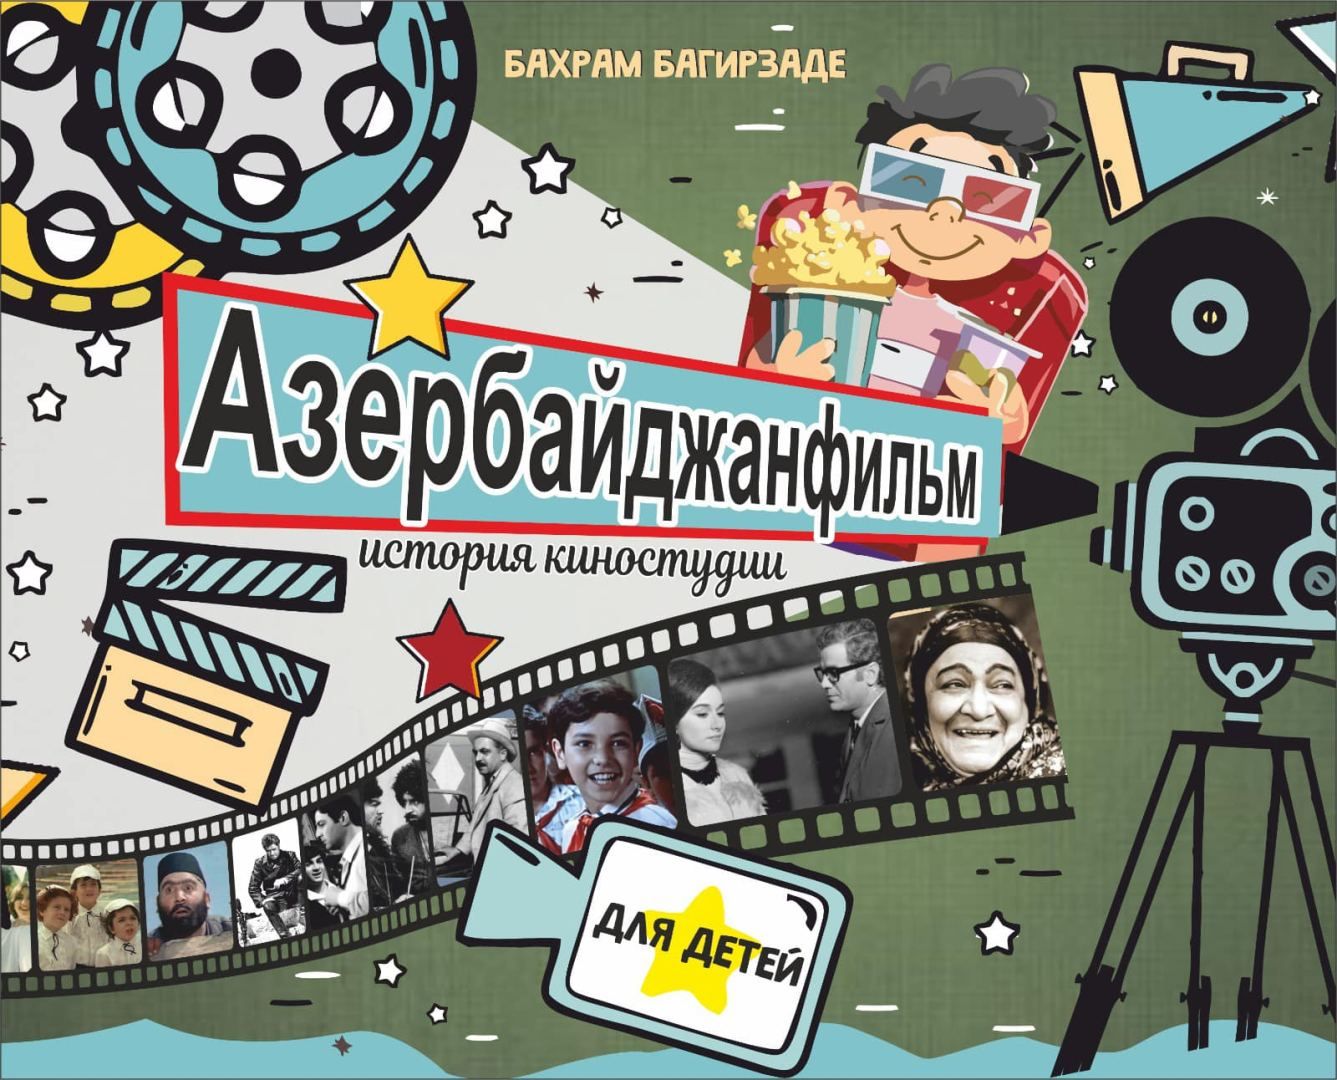 Azerbaijan's Honored Artist publishes book about national cinema